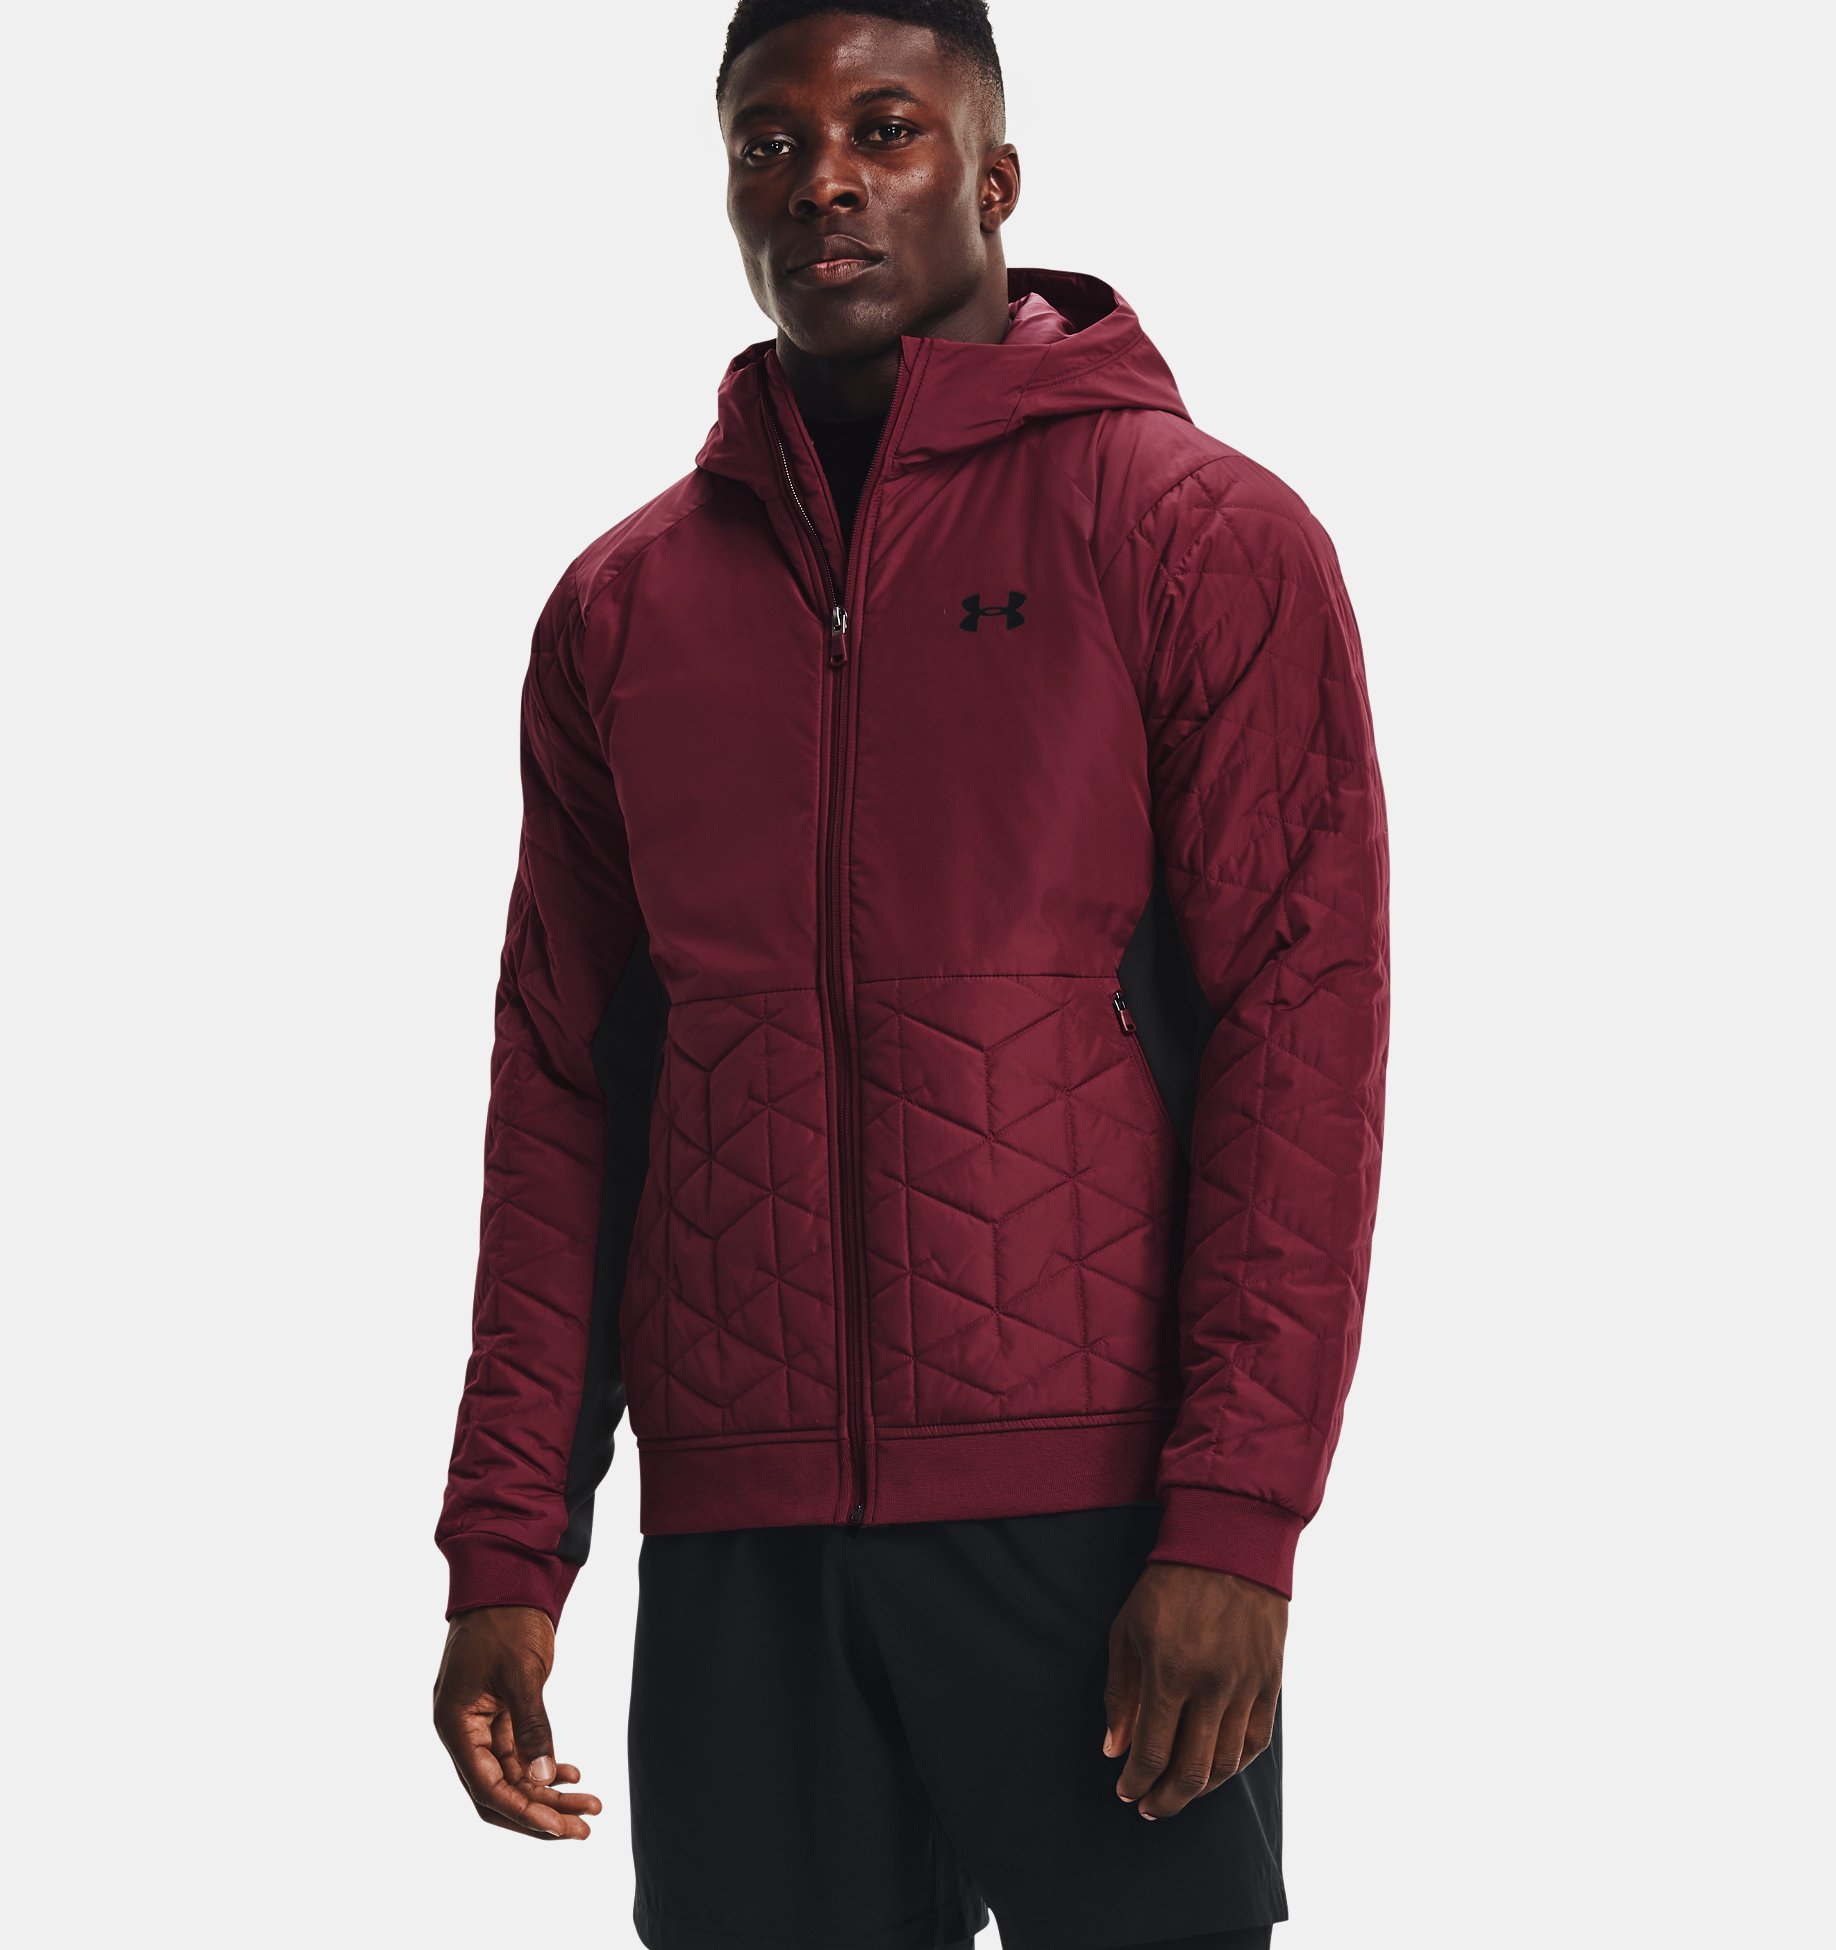 Blue Under Armour Storm Mens Insulated Jacket 